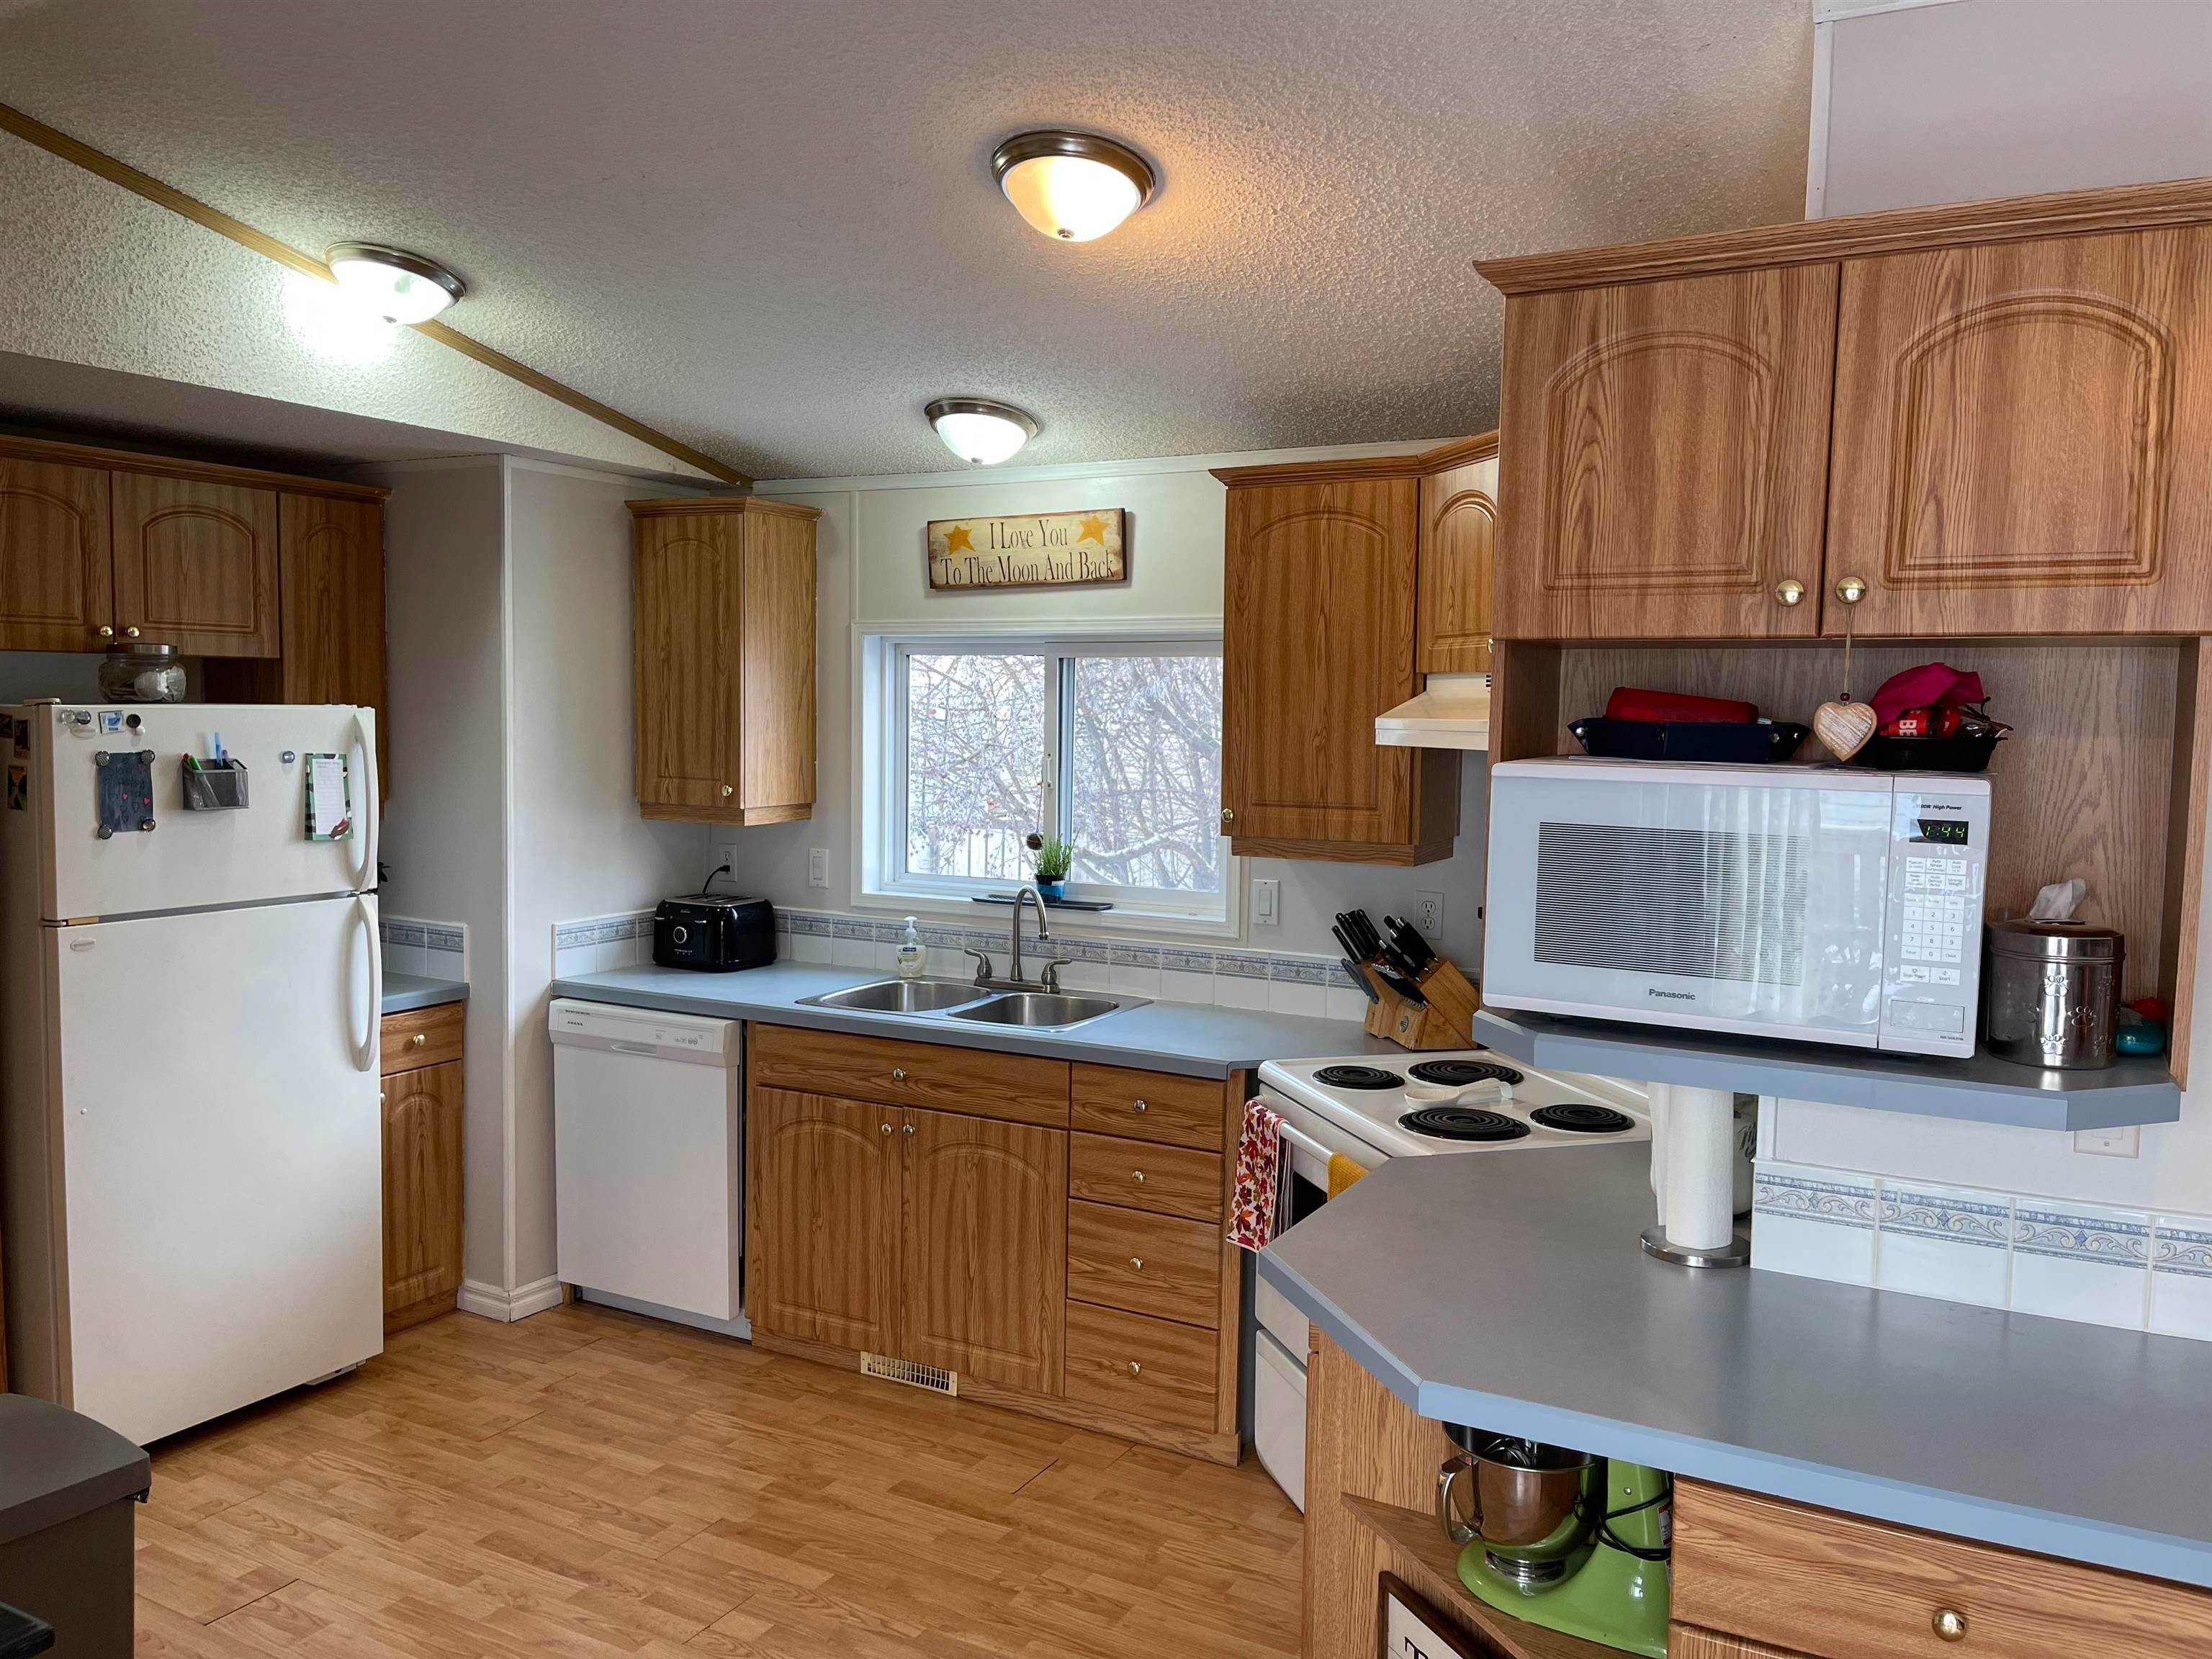 Photo 3: Photos: 10339 99 Street: Taylor Manufactured Home for sale (Fort St. John)  : MLS®# R2632849